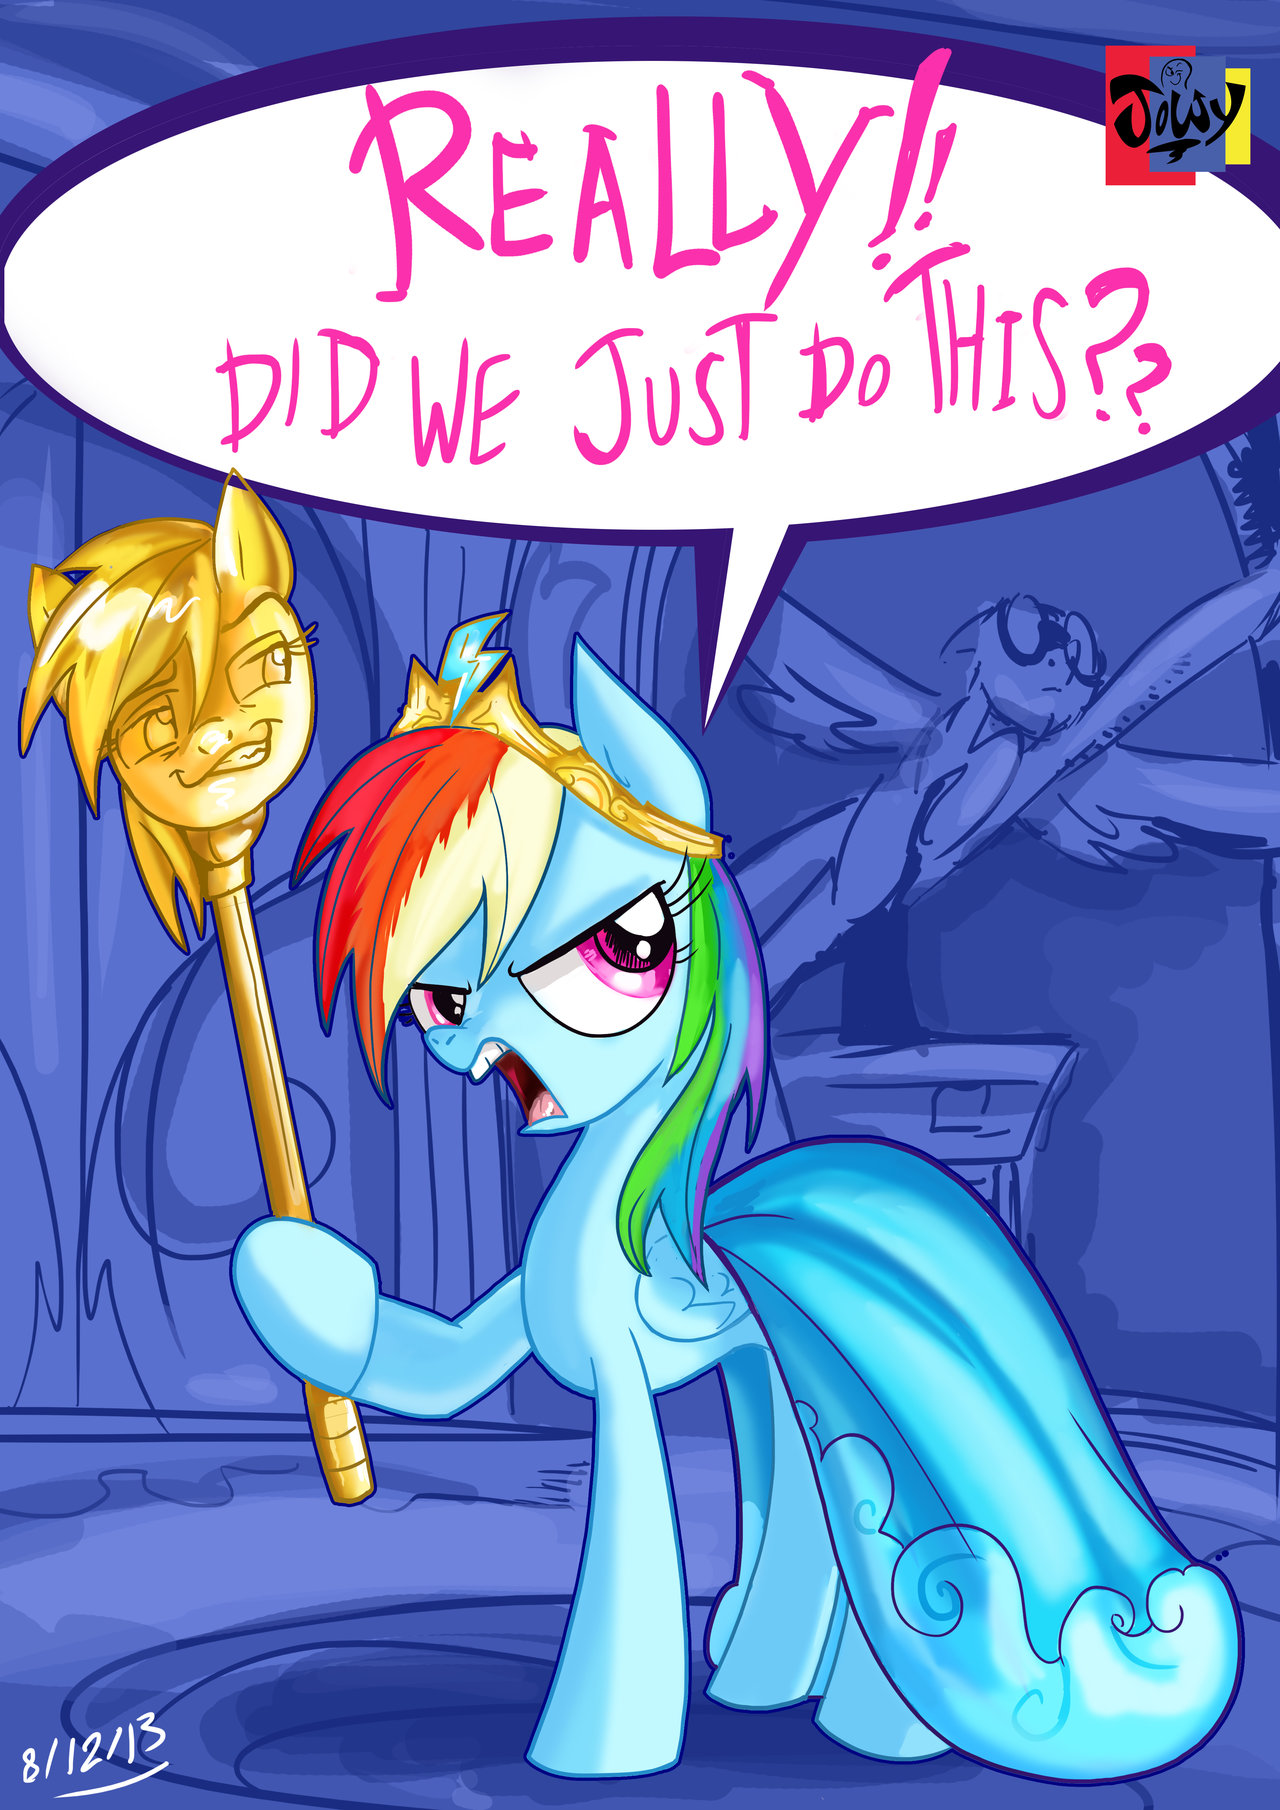 discord_started_this______by_jowybean-d6